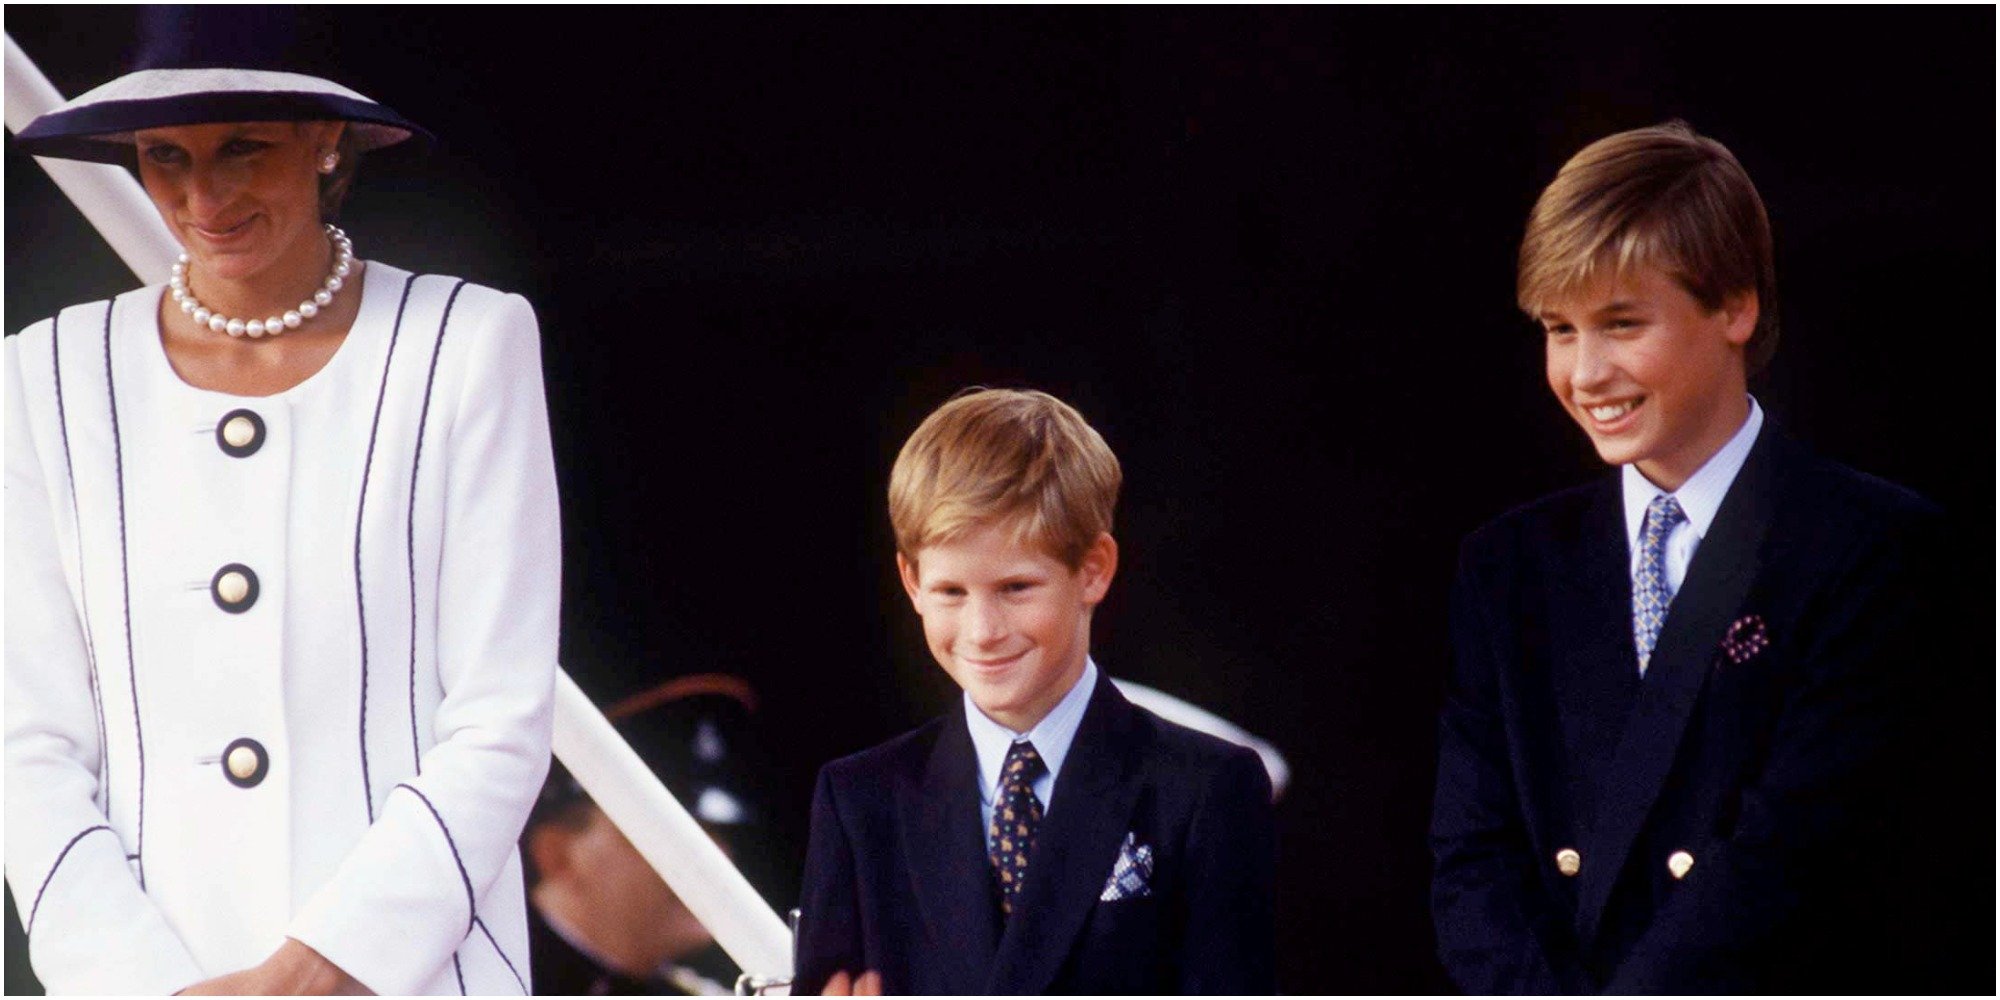 Princess Diana, Prince Harry [ Waving ] And Prince William Watching The Parade Of Veterans On V J Day.